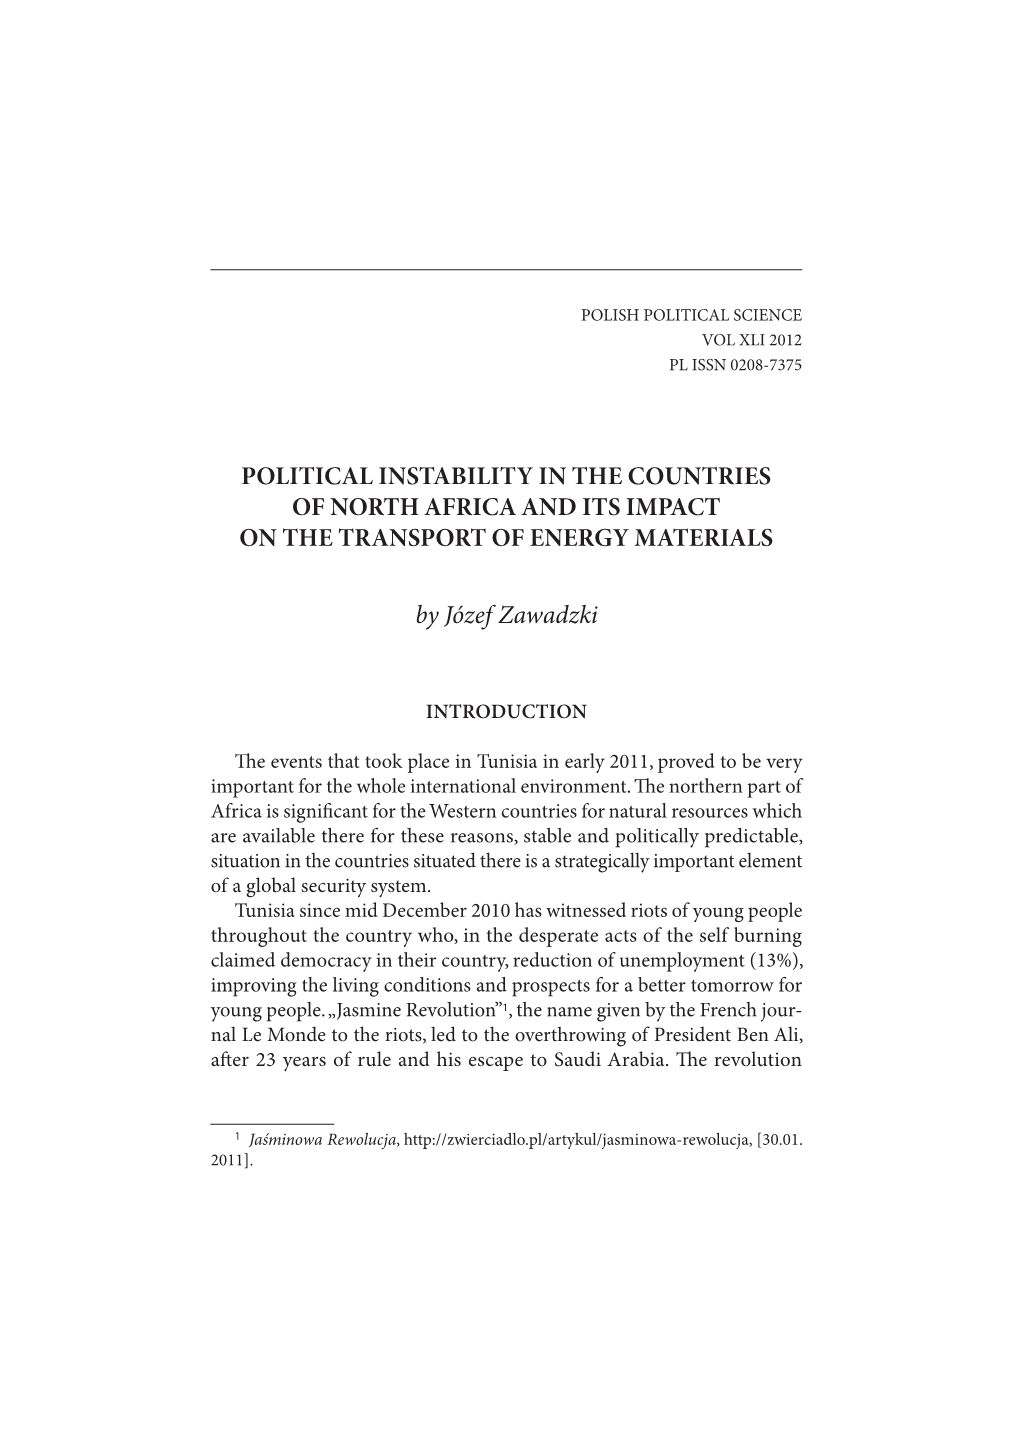 Political Instability in the Countries of North Africa and Its Impact on the Transport of Energy Materials